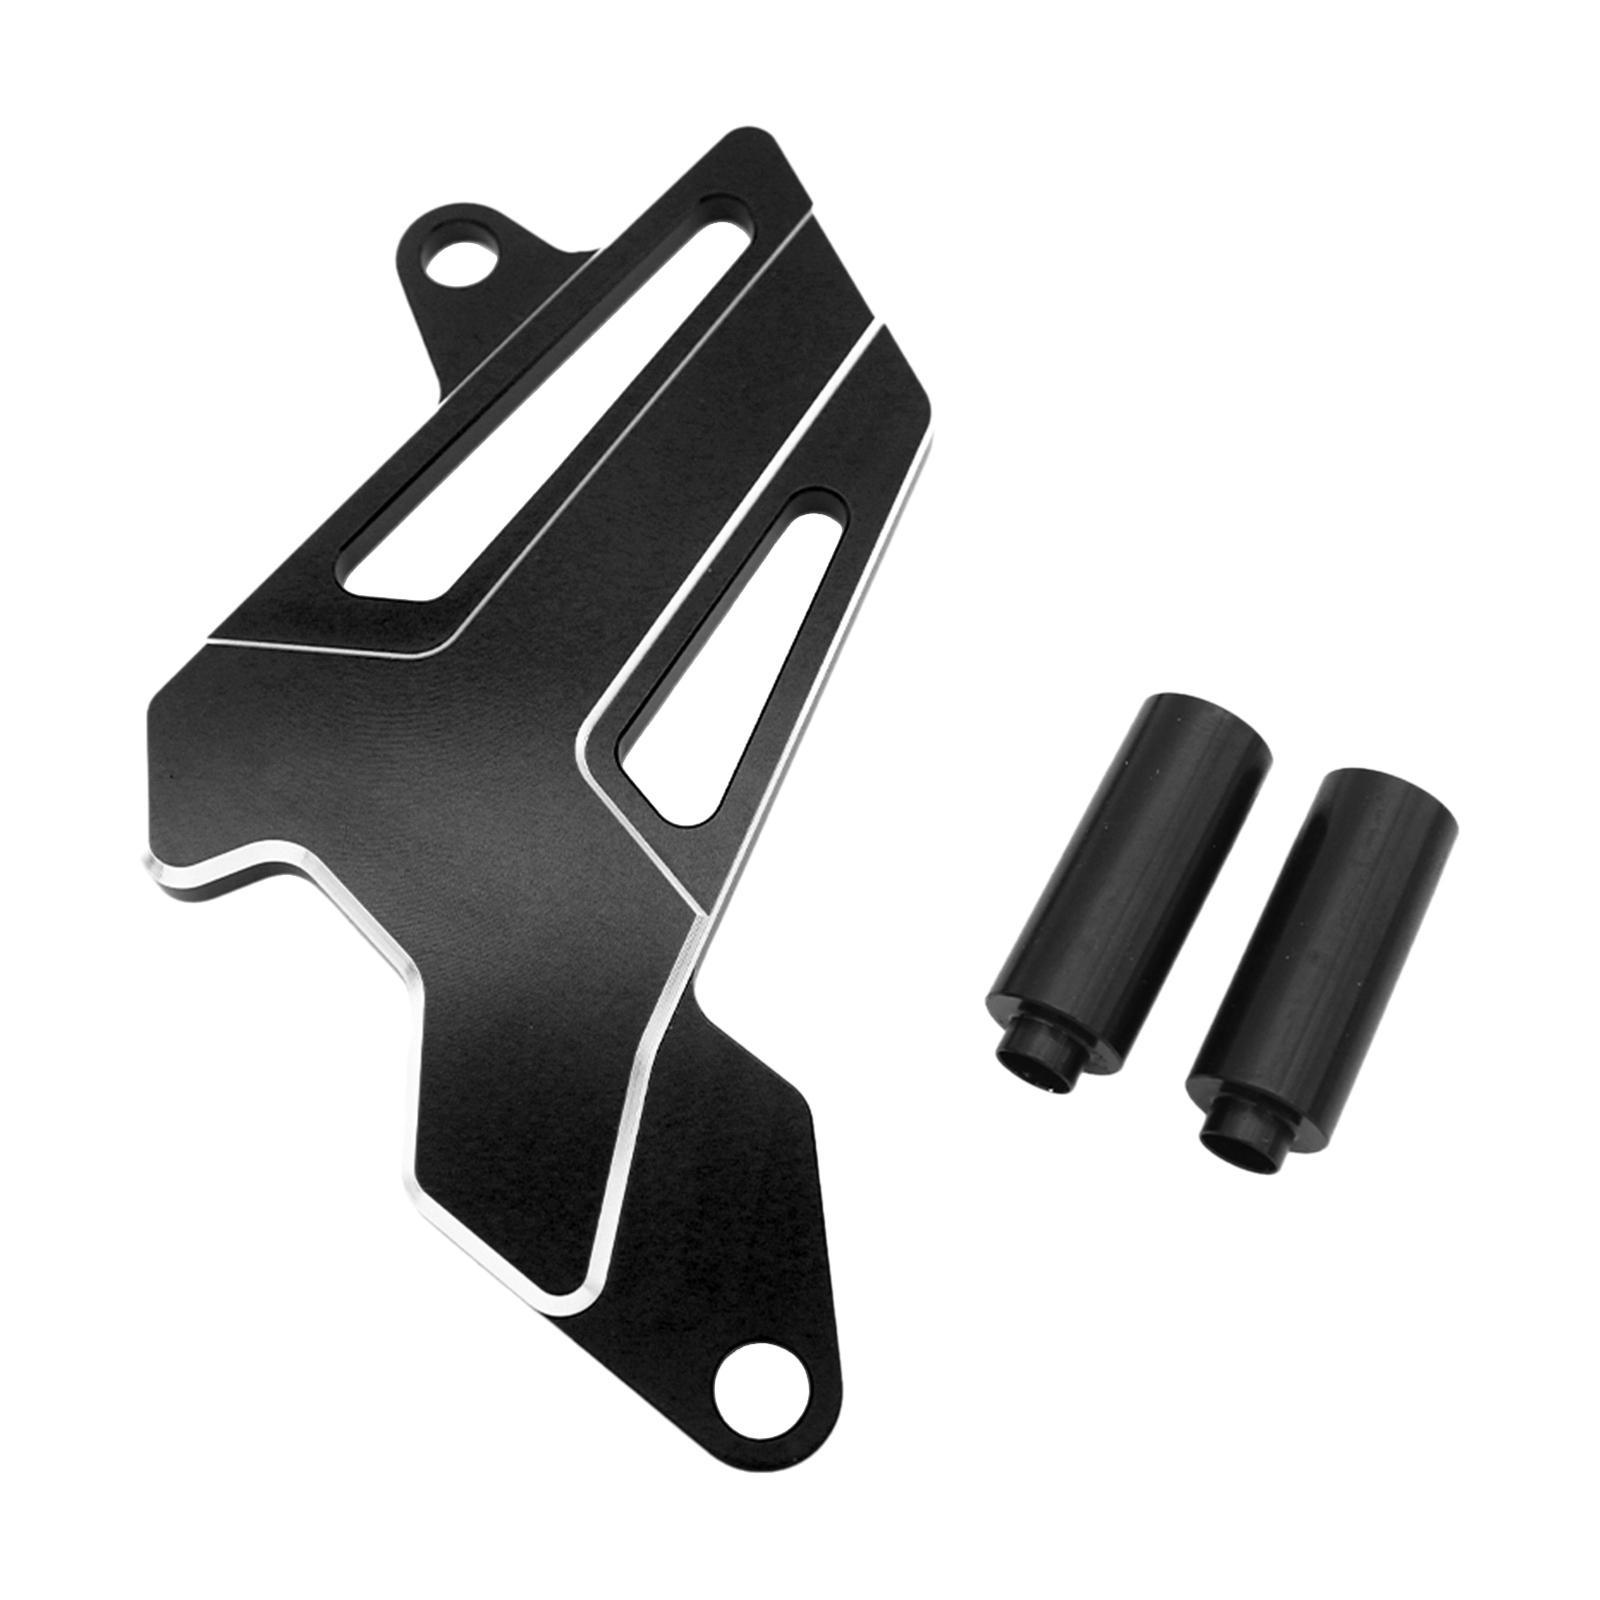 Aluminum Alloy Front Sprocket Cover for Crf250L Crf250M Crf250 Durable